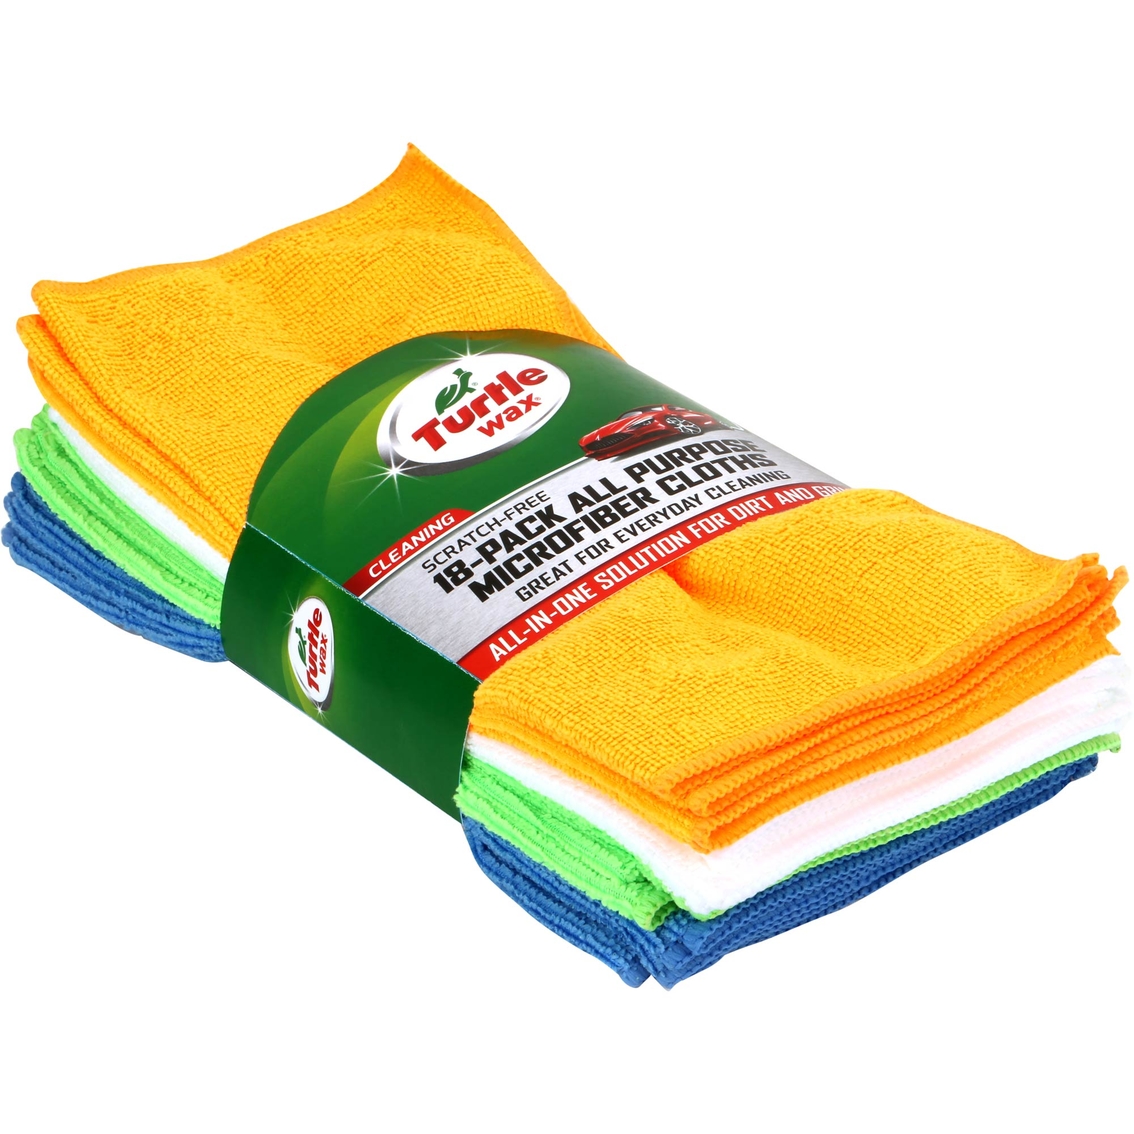 Multipurpose Cleaning Cloth Extra Large. Bag with 3 cloths.